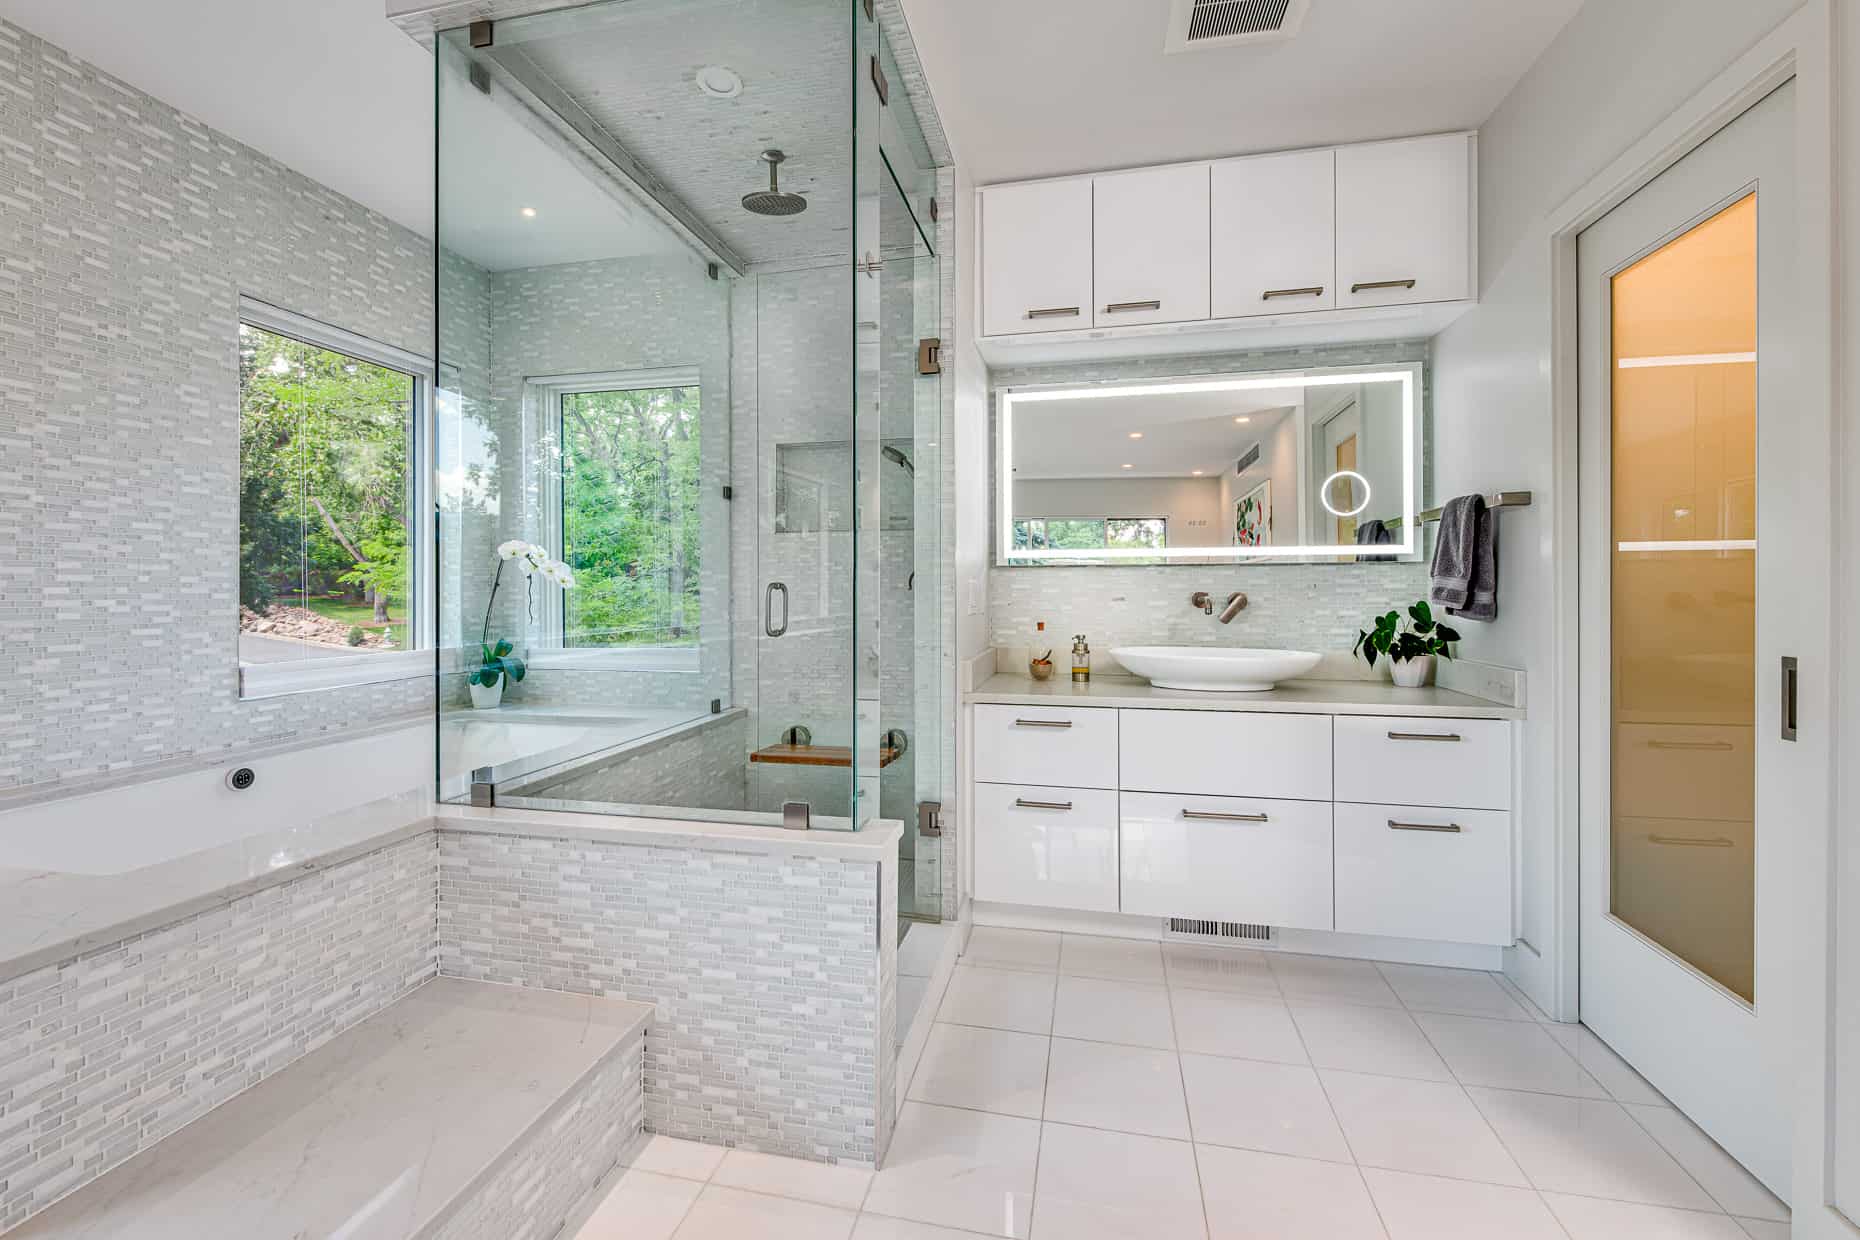 Master bathroom with glass surround shower and large windows